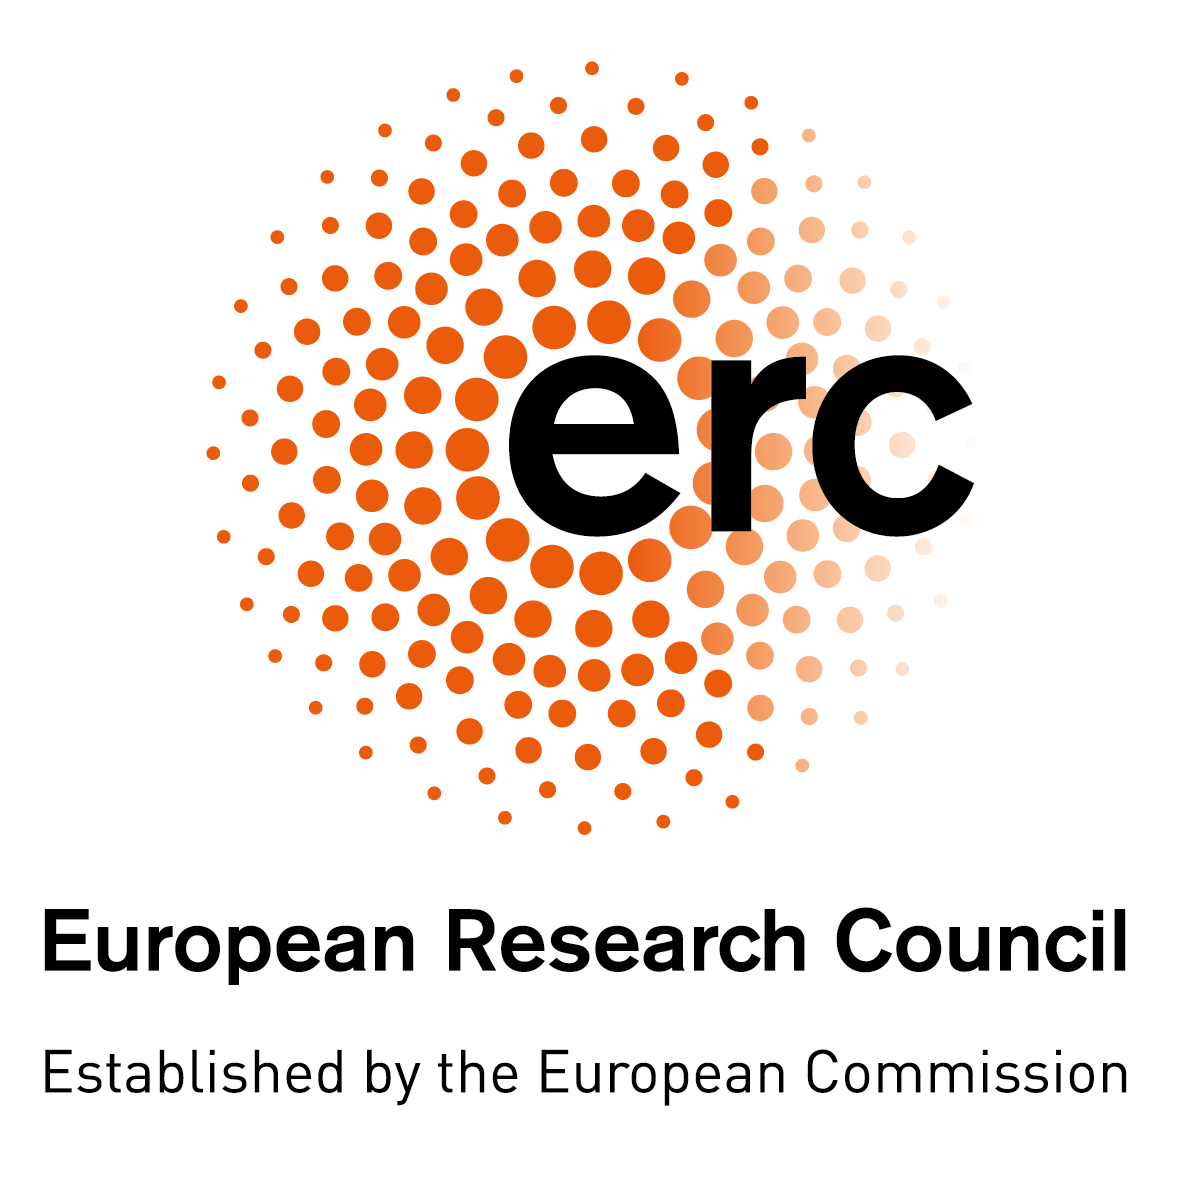 The logo of the European Research Council